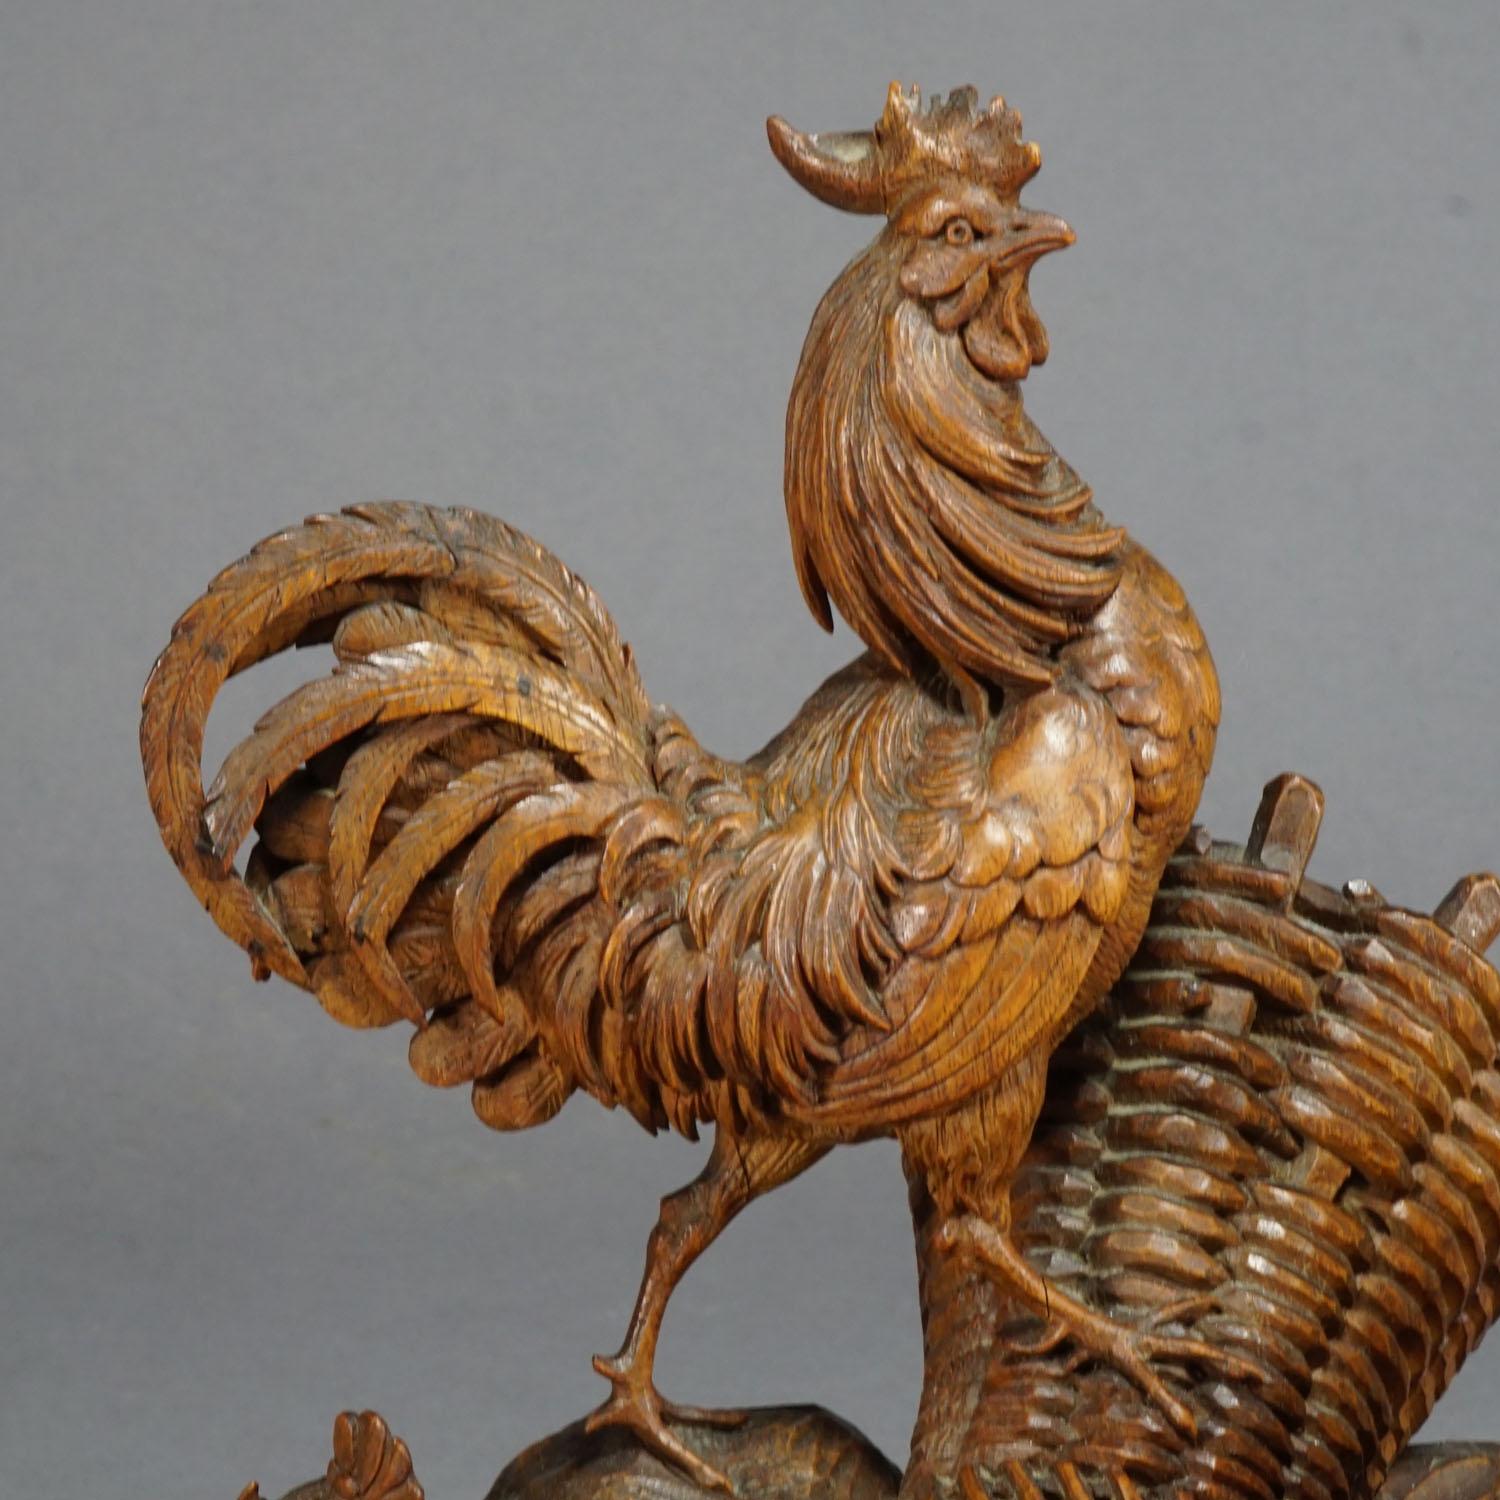 A nice hand carved wooden statue of a chicken family with cock, hen and some chicks. A very detailed woodcarving manufactured most probably in France circa 1900

Measures: Width 11.02